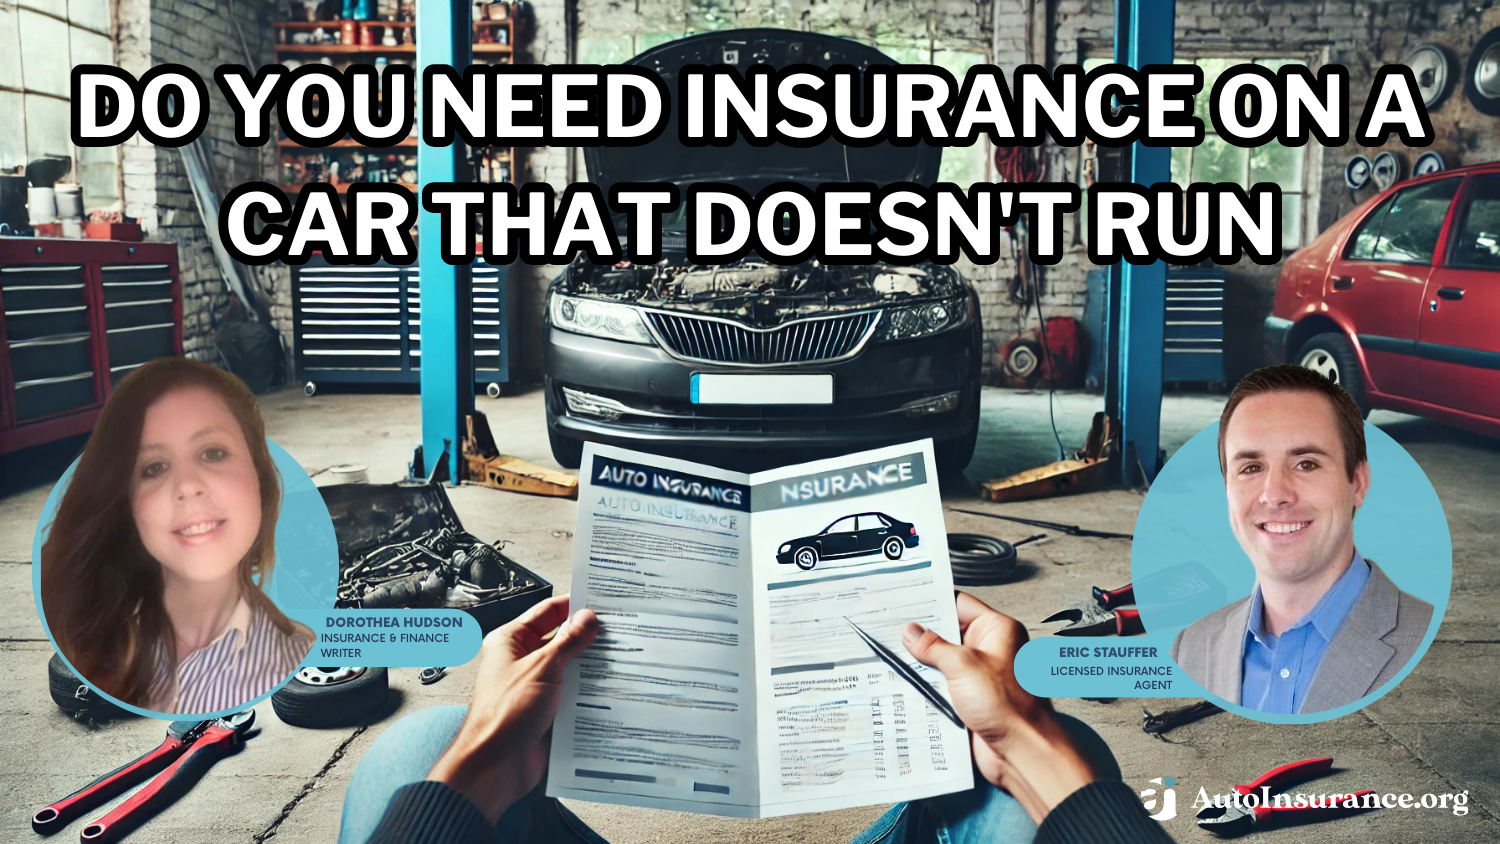 Do you need insurance on a car that doesn’t run?